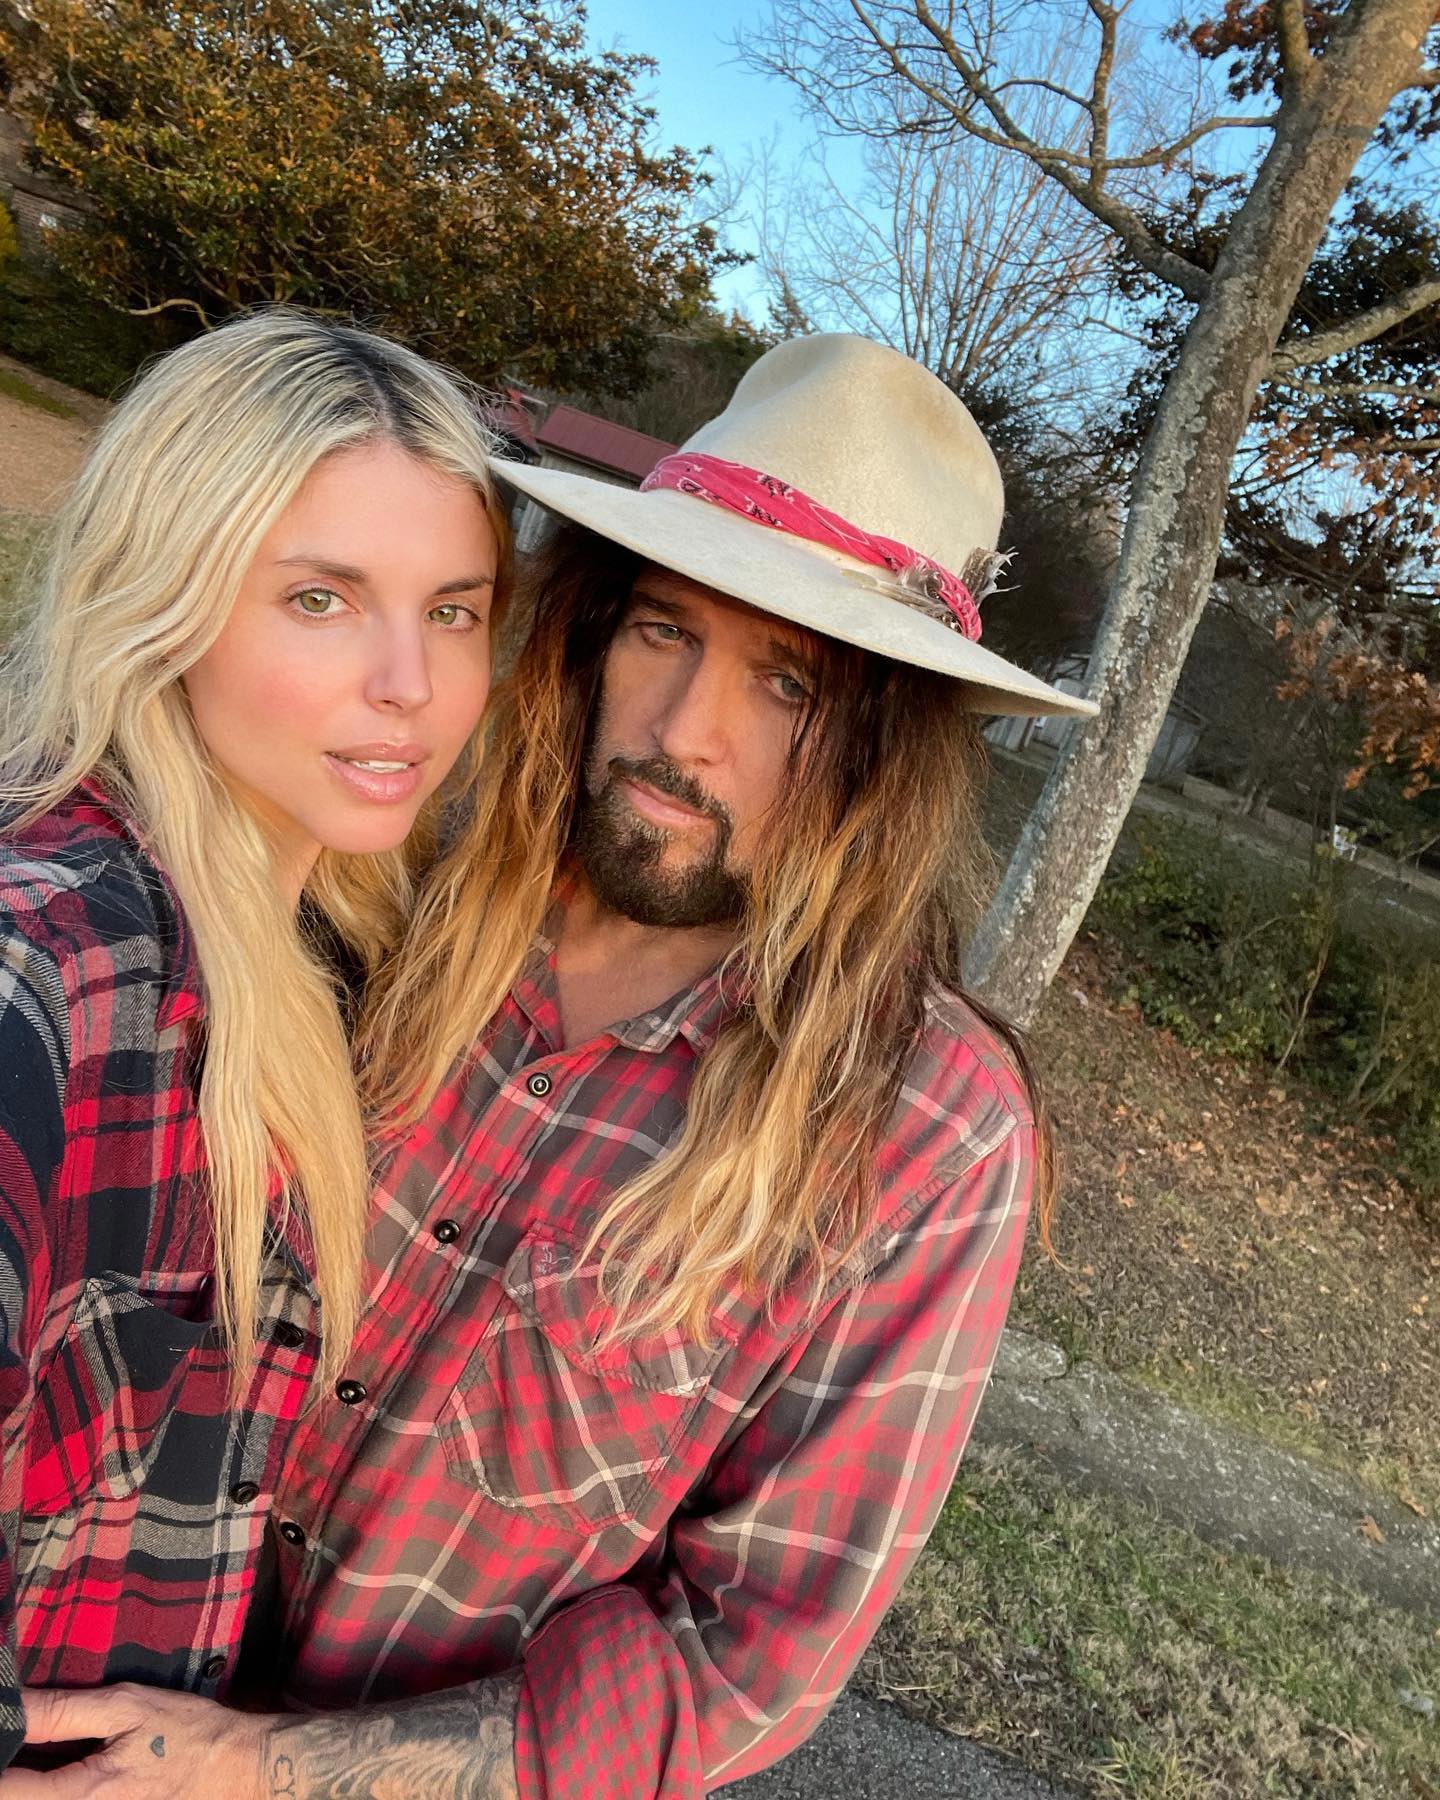 Billy Ray Cyrus’ Lawyers Are Investigating Firerose’s ‘False’ Claims